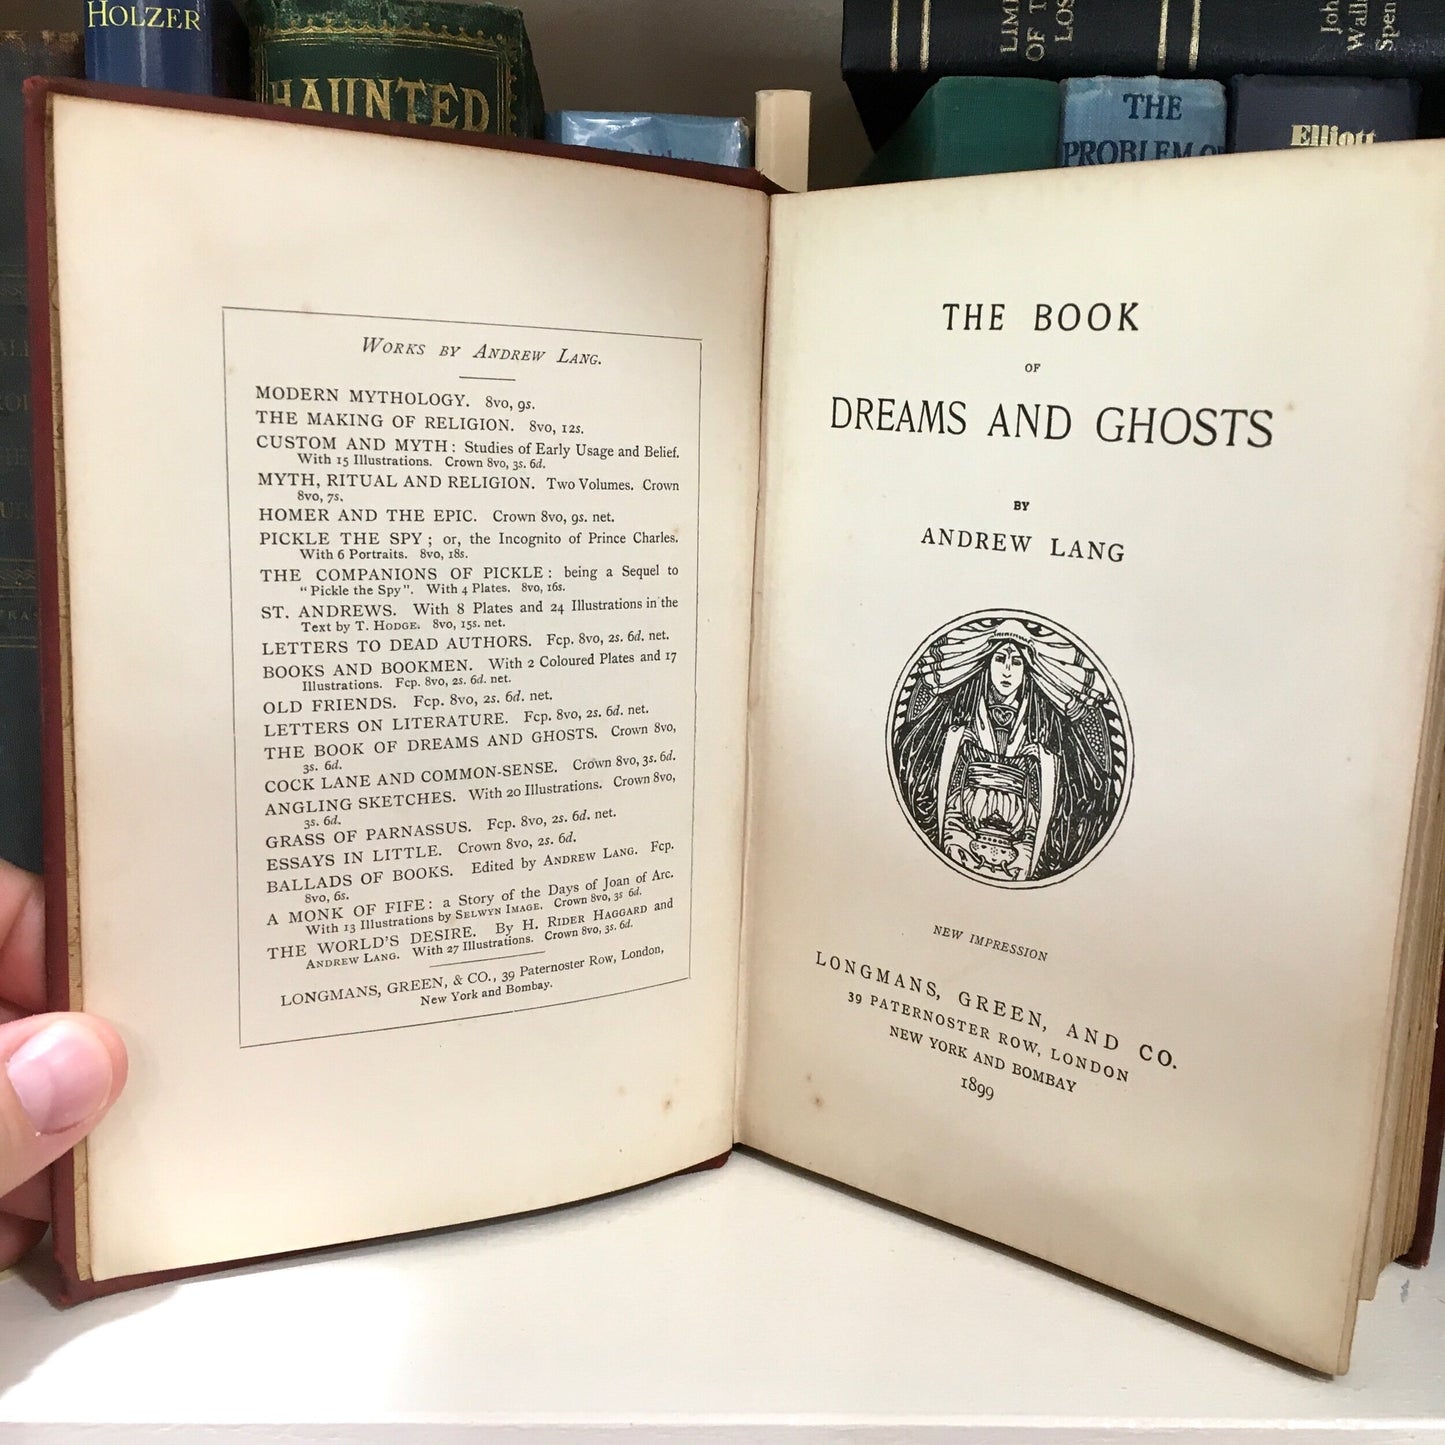 LANG, Andrew "The Book of Dreams and Ghosts" [Longmans, Green & Co, 1899] - Buzz Bookstore